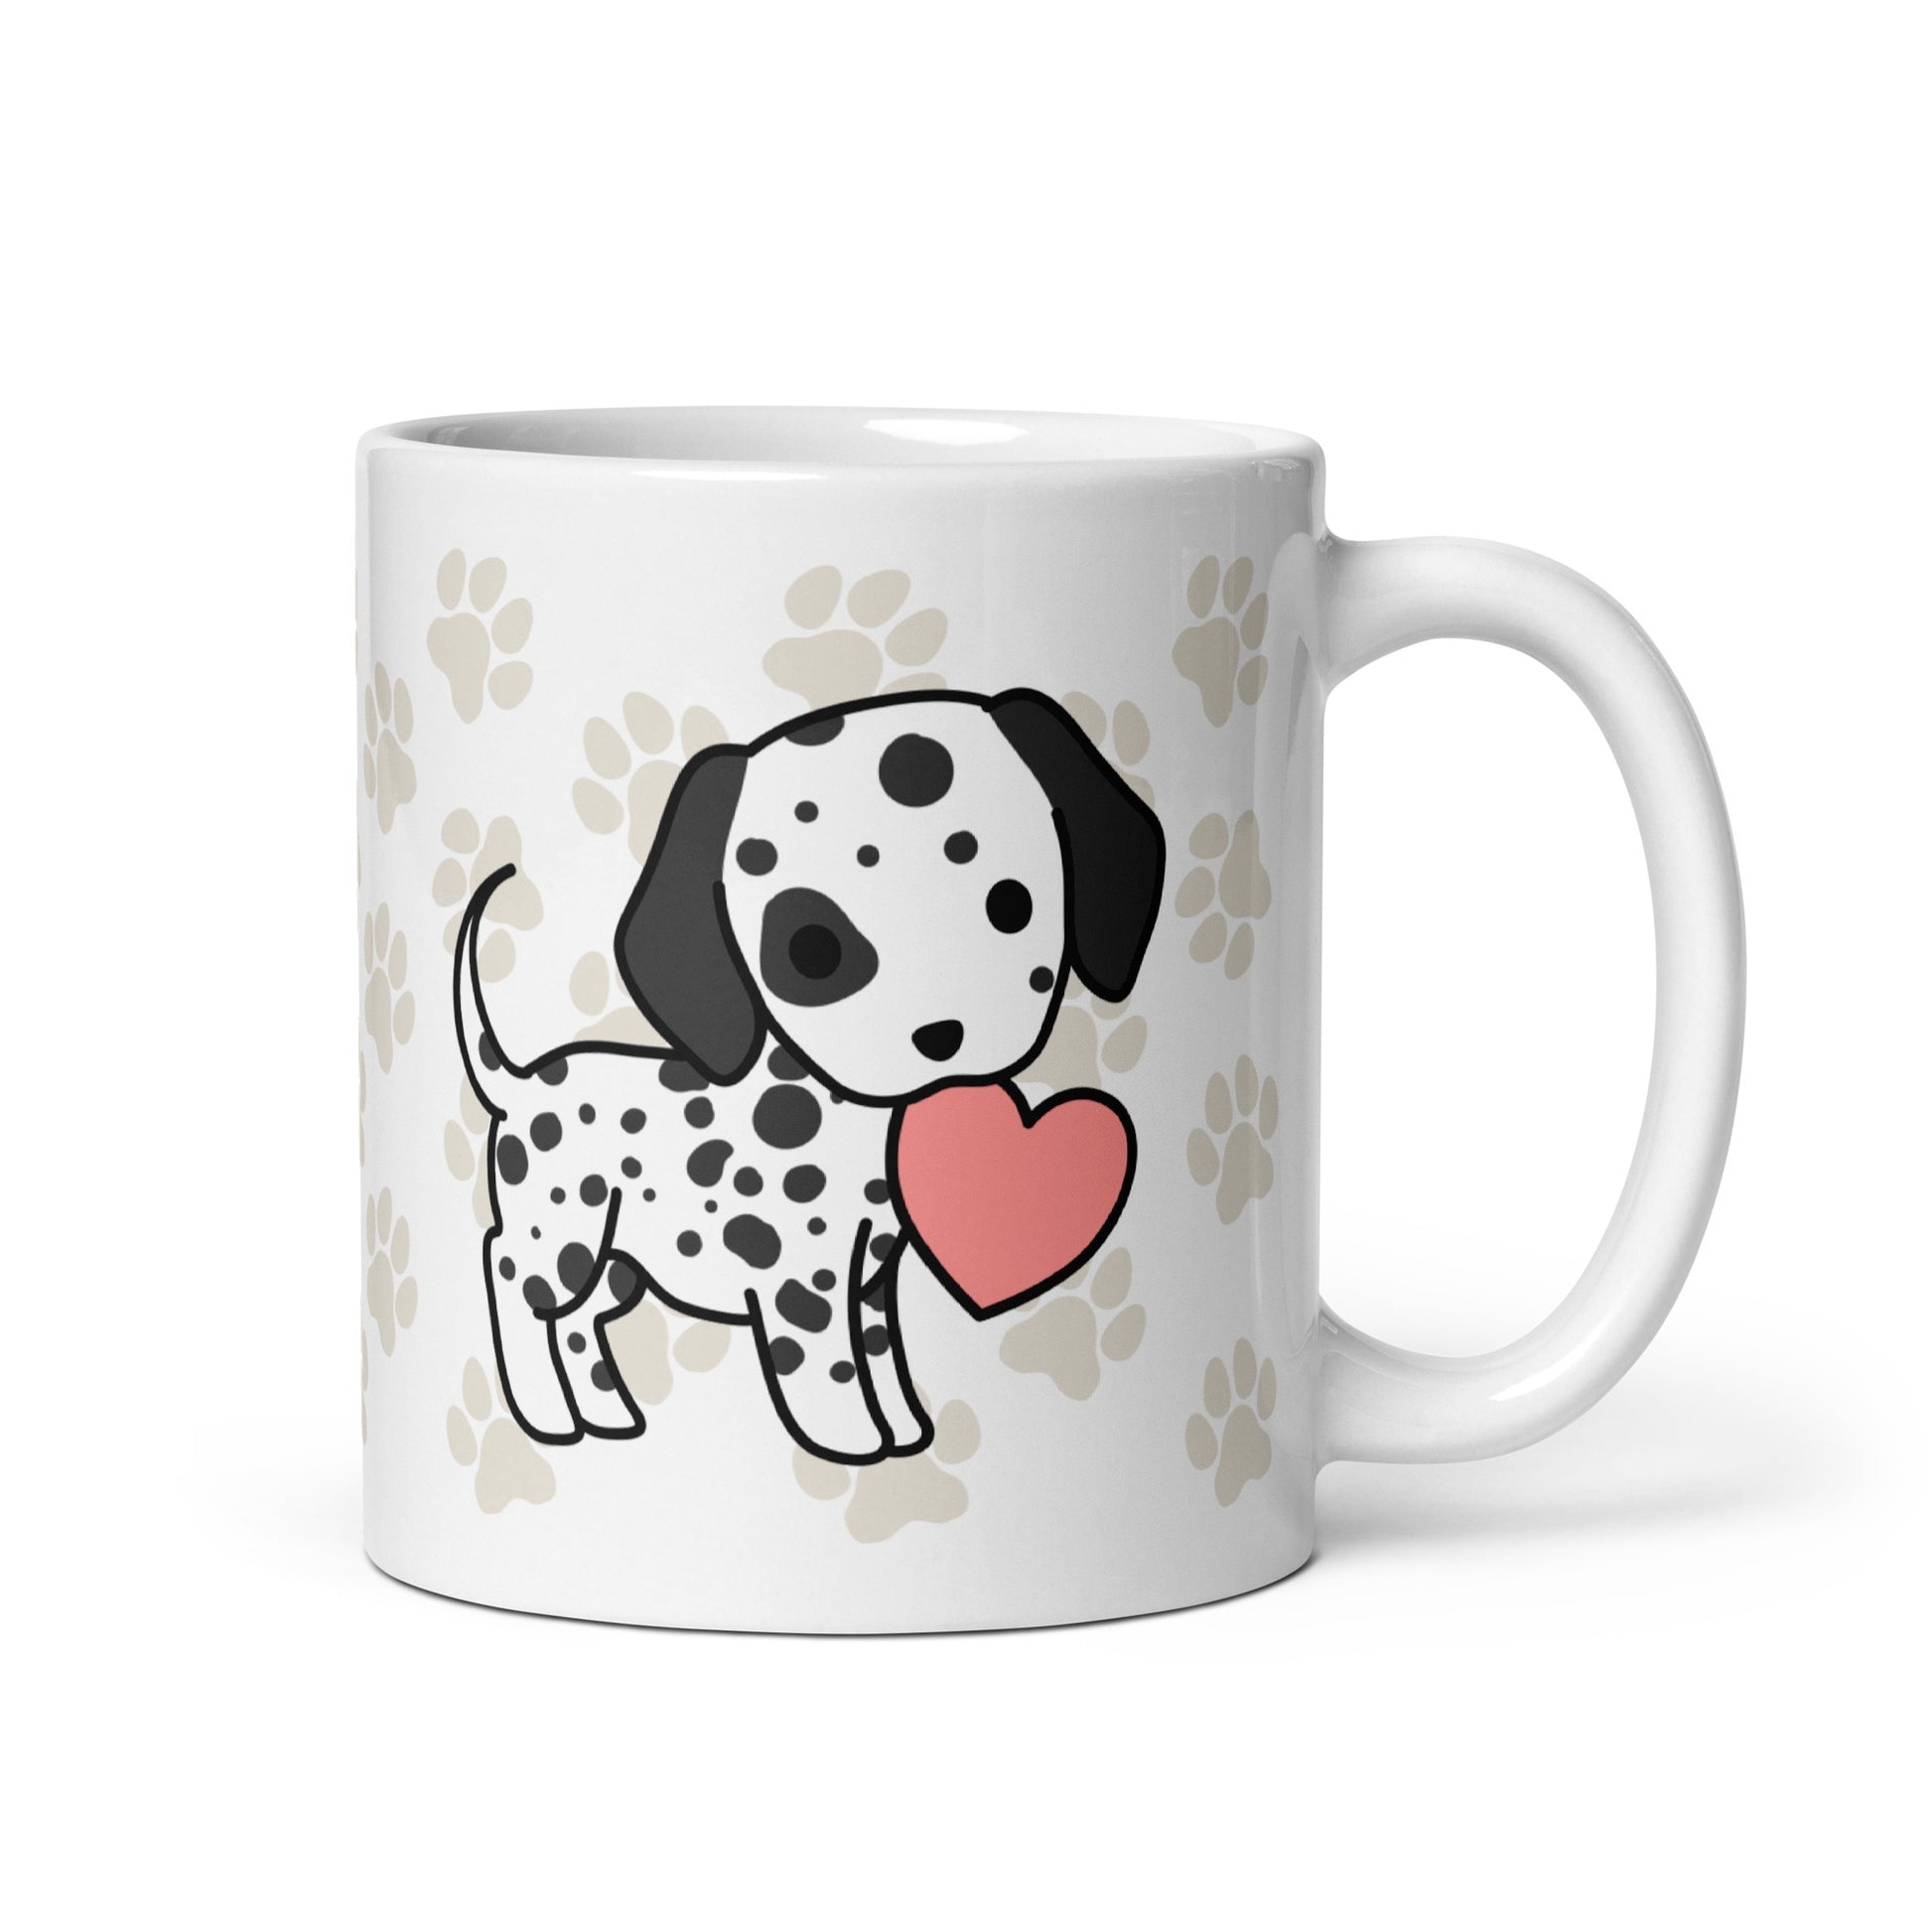 A white 11 ounce ceramic mug with a pattern of light brown pawprints all over. The mug also features a stylized illustration of a Dalmatian holding a heart in its mouth.